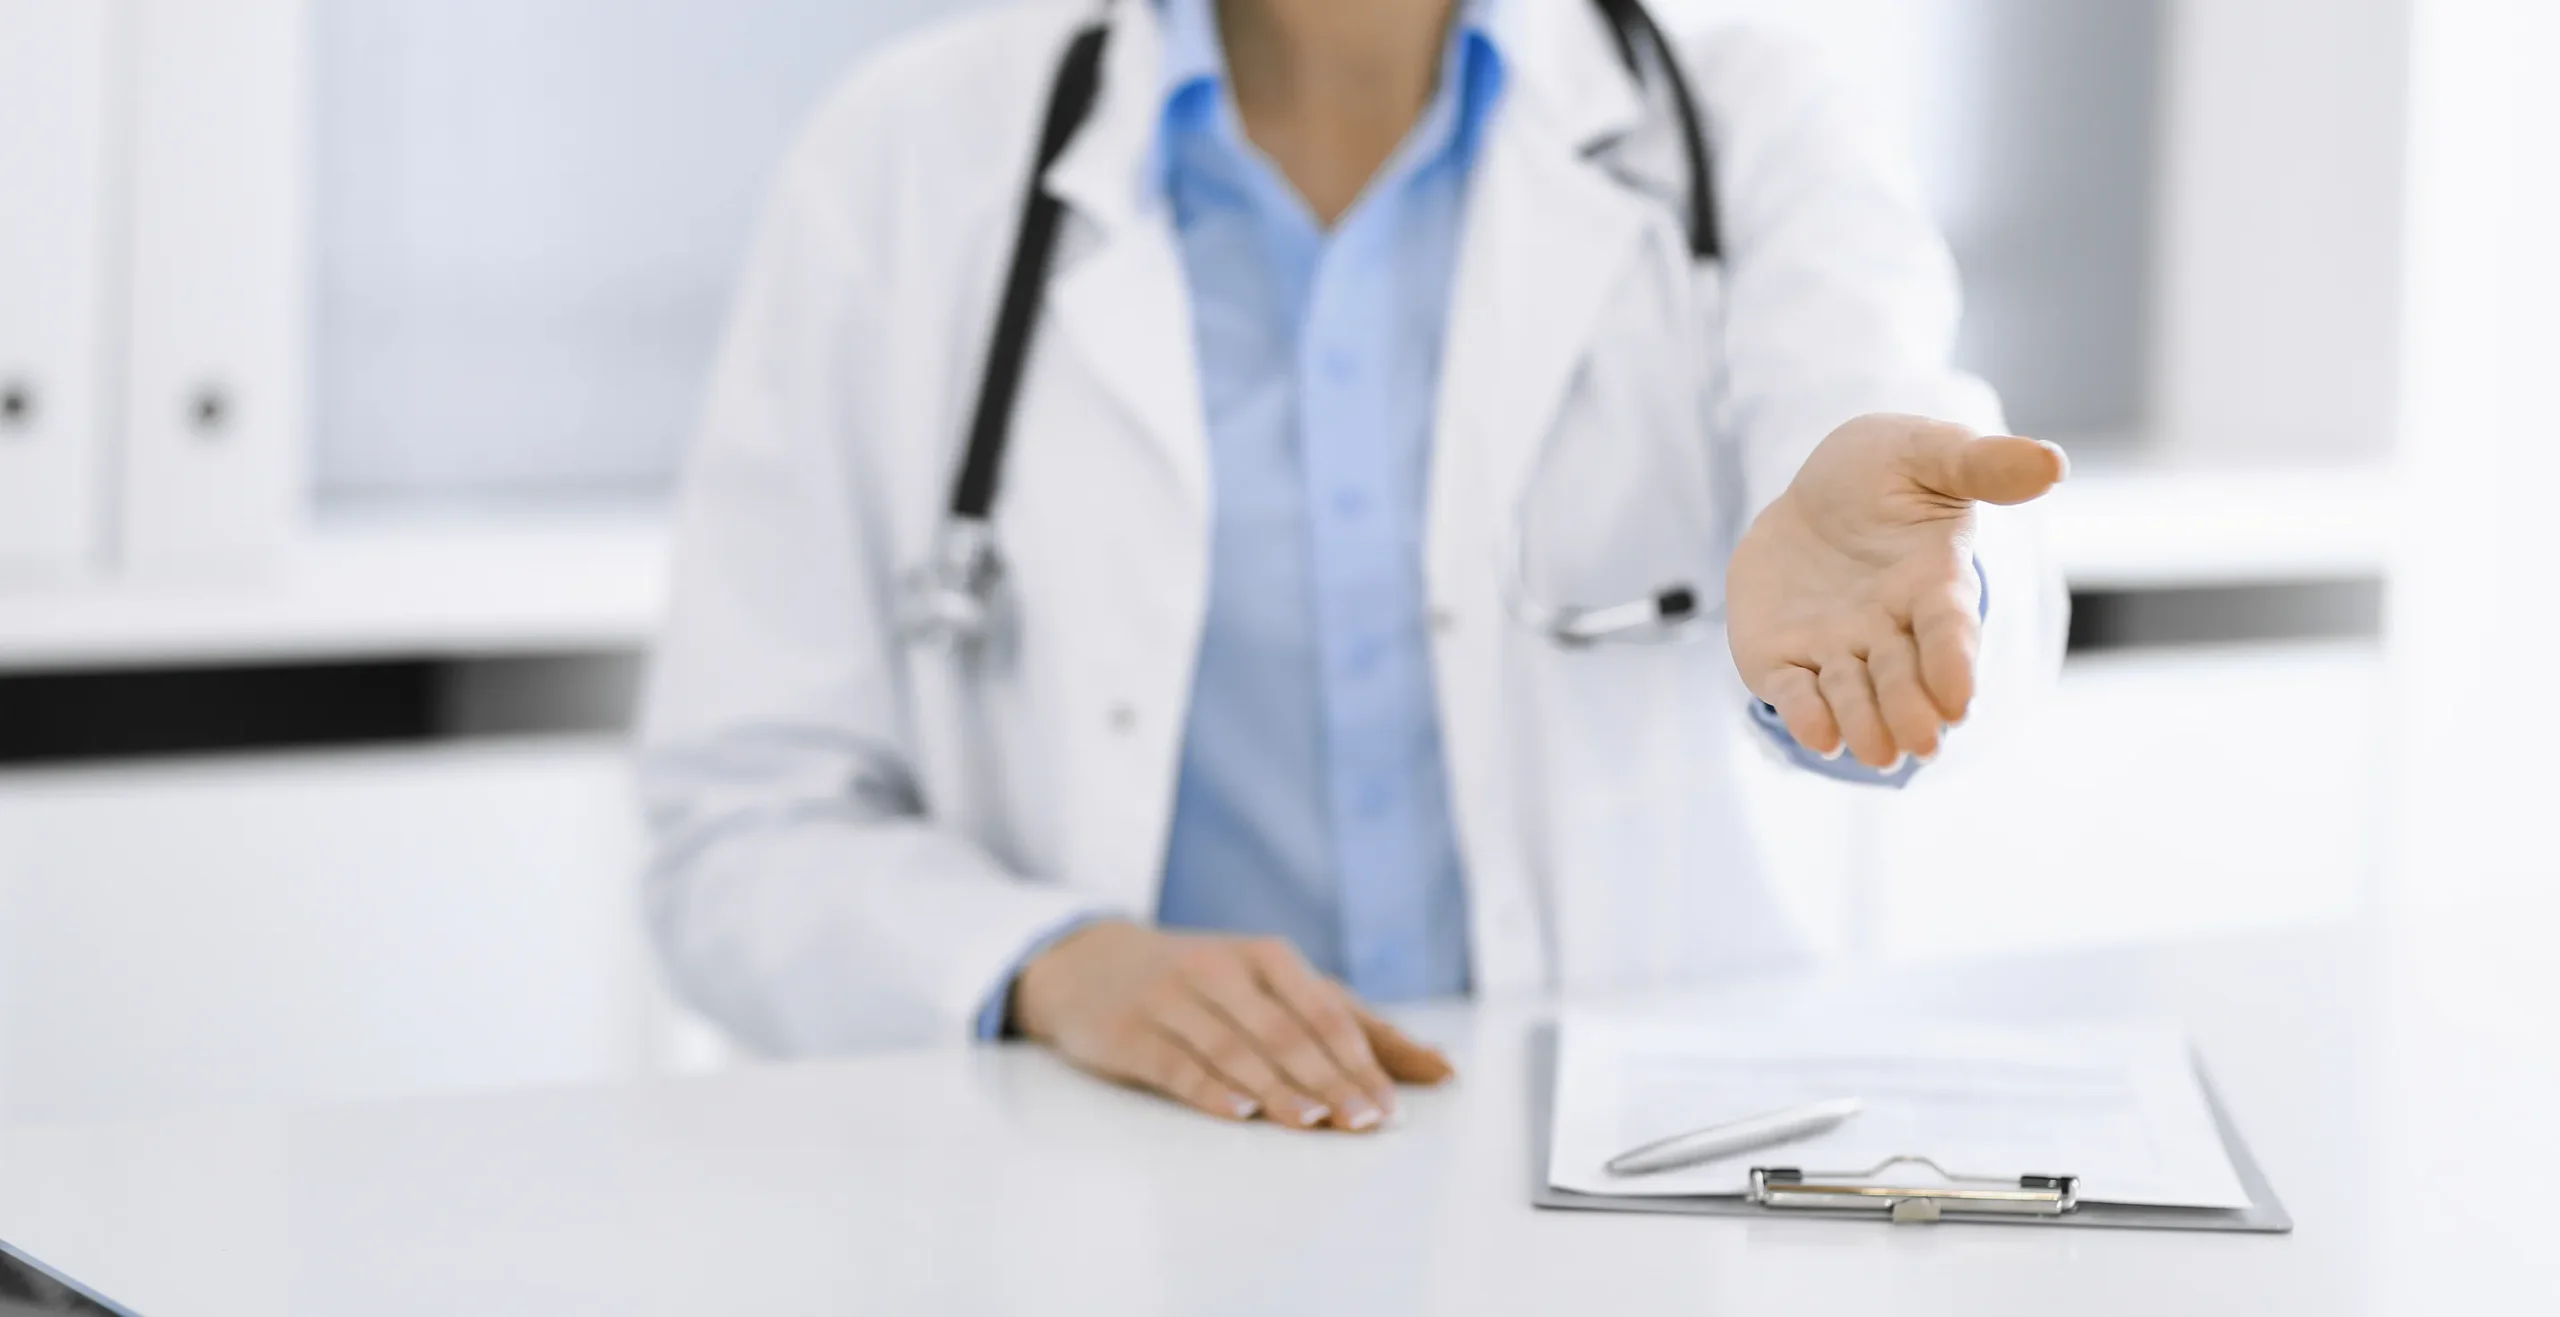 Finding the right doctor after a car accident